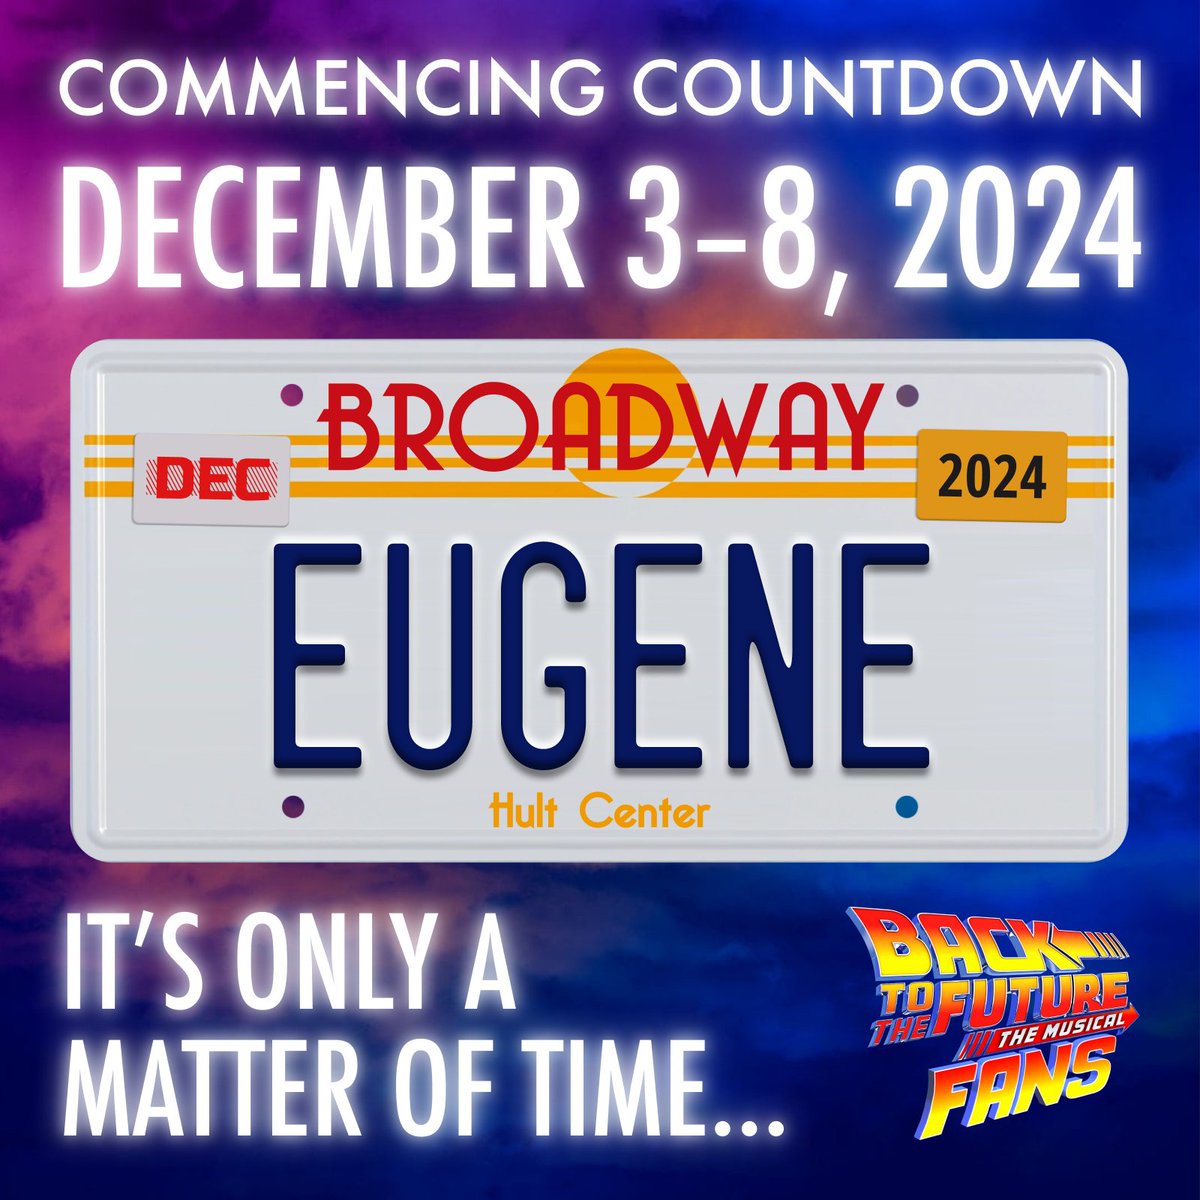 DON’T BET YOUR FUTURE ON ONE ROLL OF THE DICE 🎲

The 2024/2025 #Broadway in Eugene season presented by the @HultCenter includes @BTTFBway from December 3rd to 8th, 2024 at the Silva Concert Hall, The Hult Center, #Eugene, #Oregon ⚡️

🎼 It’s only a matter of time… 💙

#bttftour